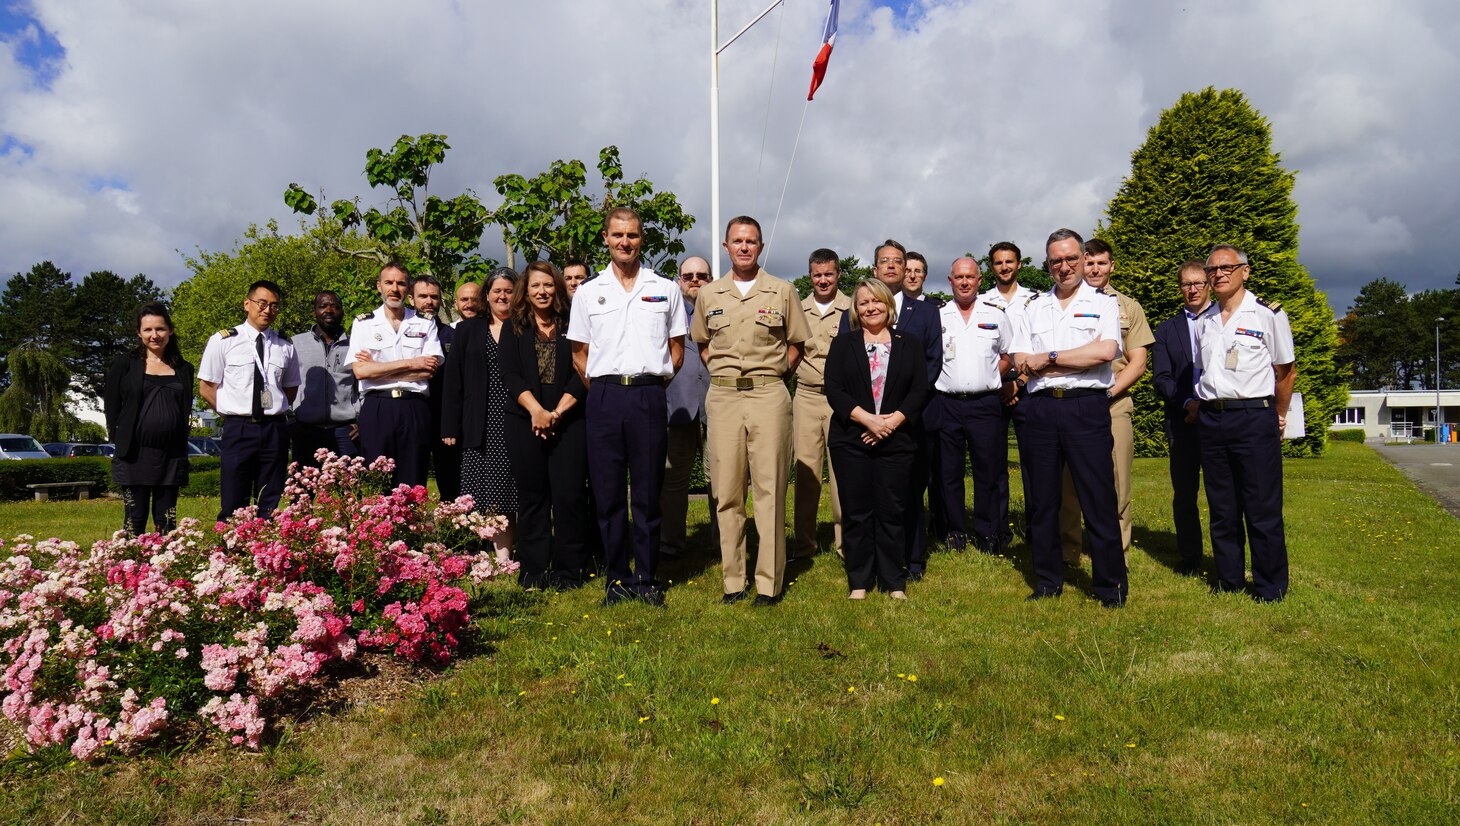 Brest, France —— Rear Adm. Ron Piret, Commander, Naval Meteorology and Oceanography Command, and staff members visited the Naval Hydrographic and Oceanographic Service (SHOM) in France, June 27, 2022. 



US and French officials came together to discuss ways both organizations can cooperate further in the European theater and globally in hydrography and oceanography.